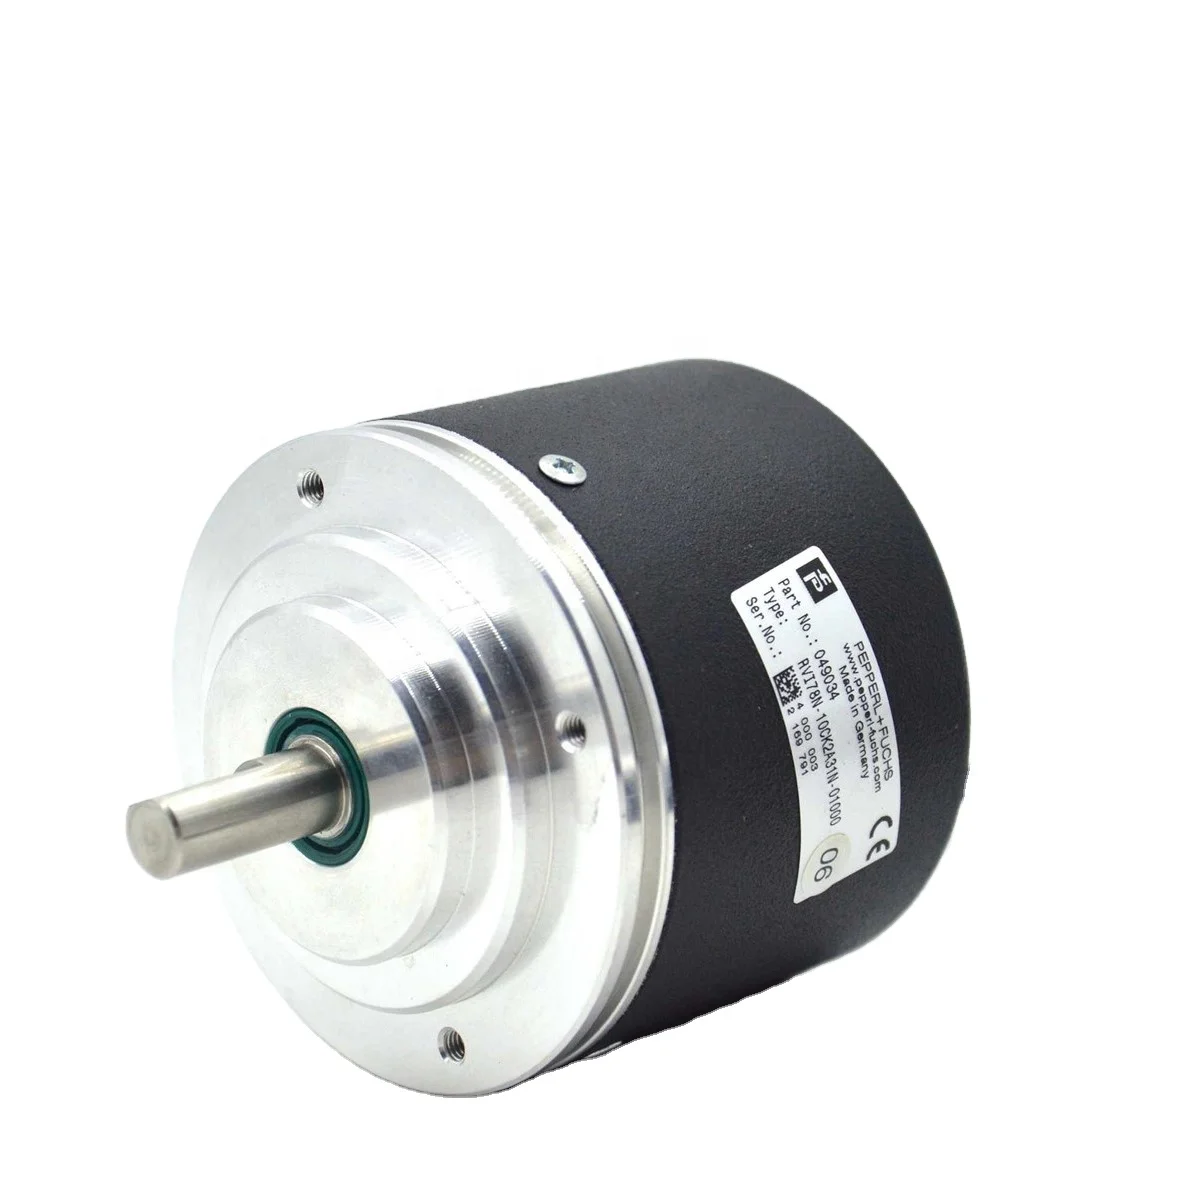 

RVI78N-10CK2A31N-01000 P+F encoder Solid shaft rotary New original genuine goods are available from stock